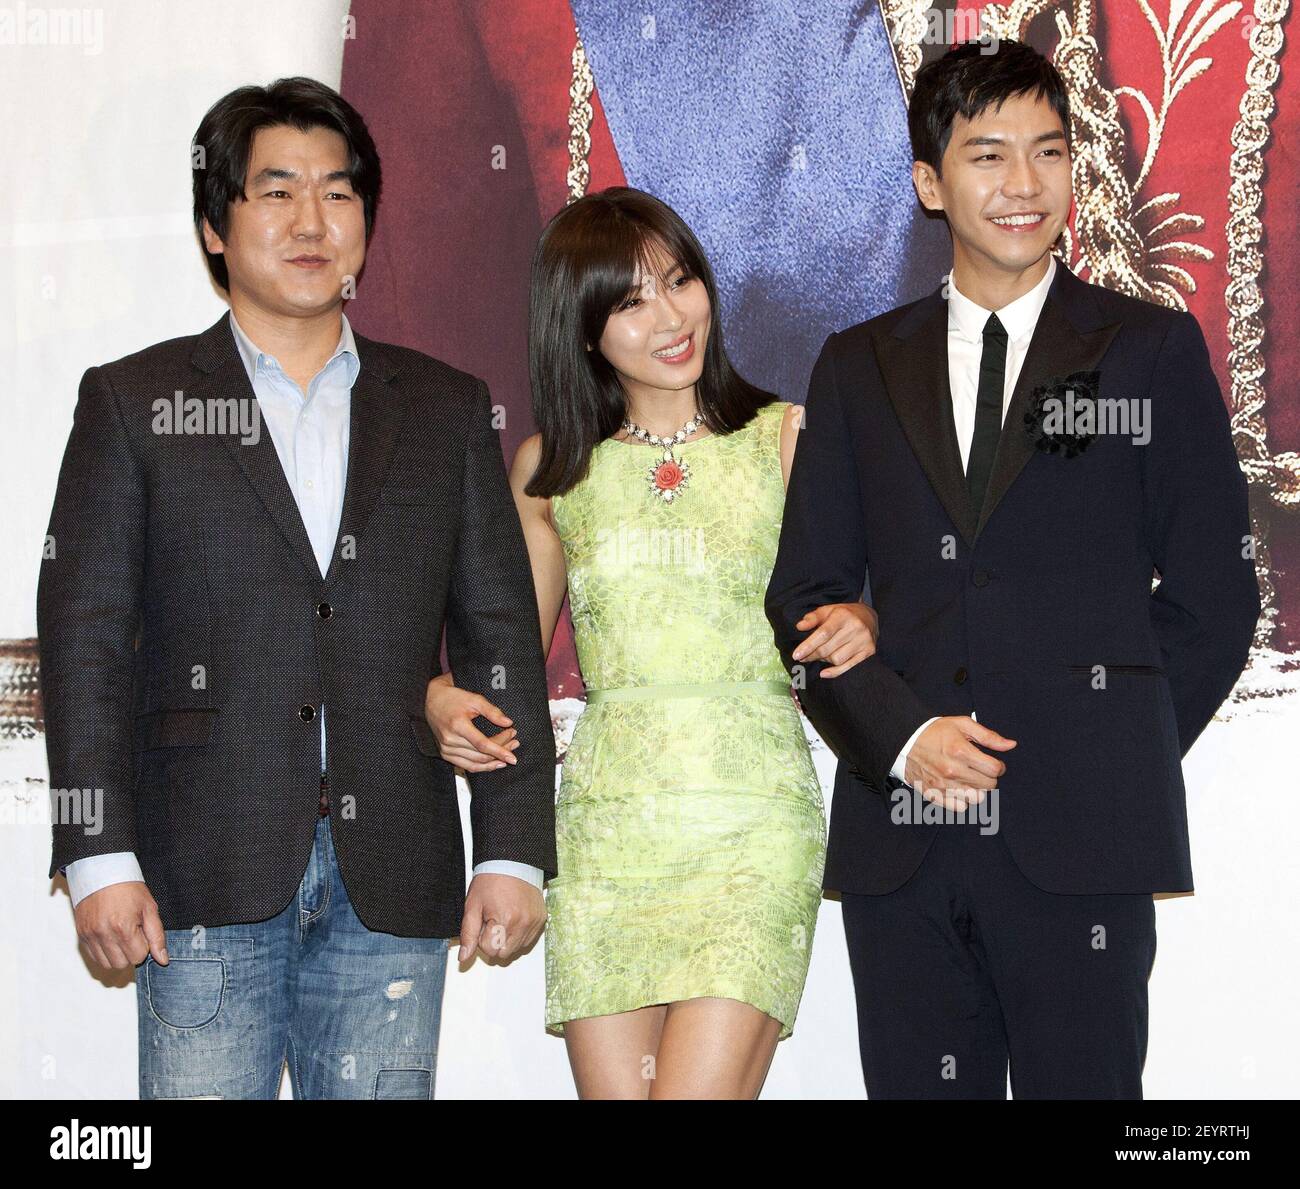 8 March 2012 - Seoul, South Korea - (L-R) South Korean actor Yoon Jae-Moon,  actress Ha Ji-Won, actor and singer Lee Seung-Gi, attend a photo call for  the MBC TV new drama "